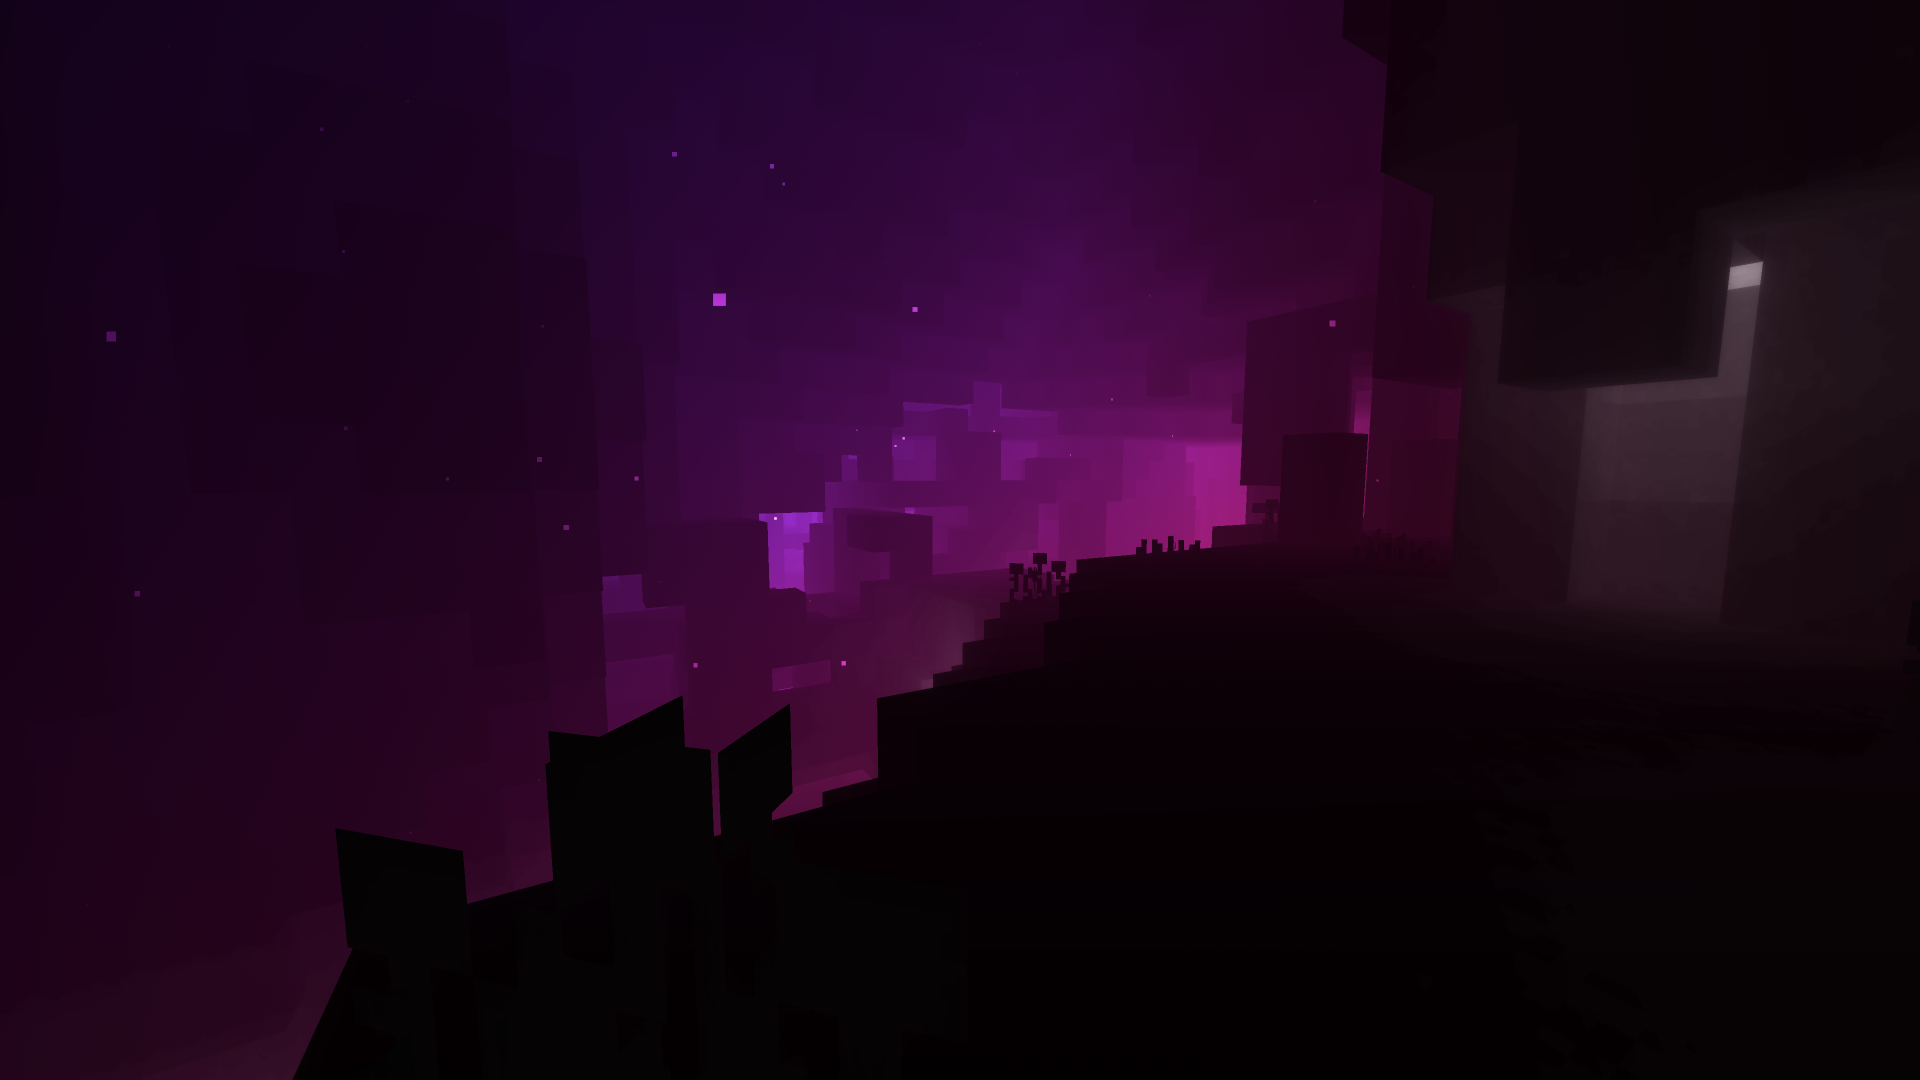 Minecraft Colorful Green Blue Purple Minecraft Nether Jungle Shaders Wallpaper:1920x1080